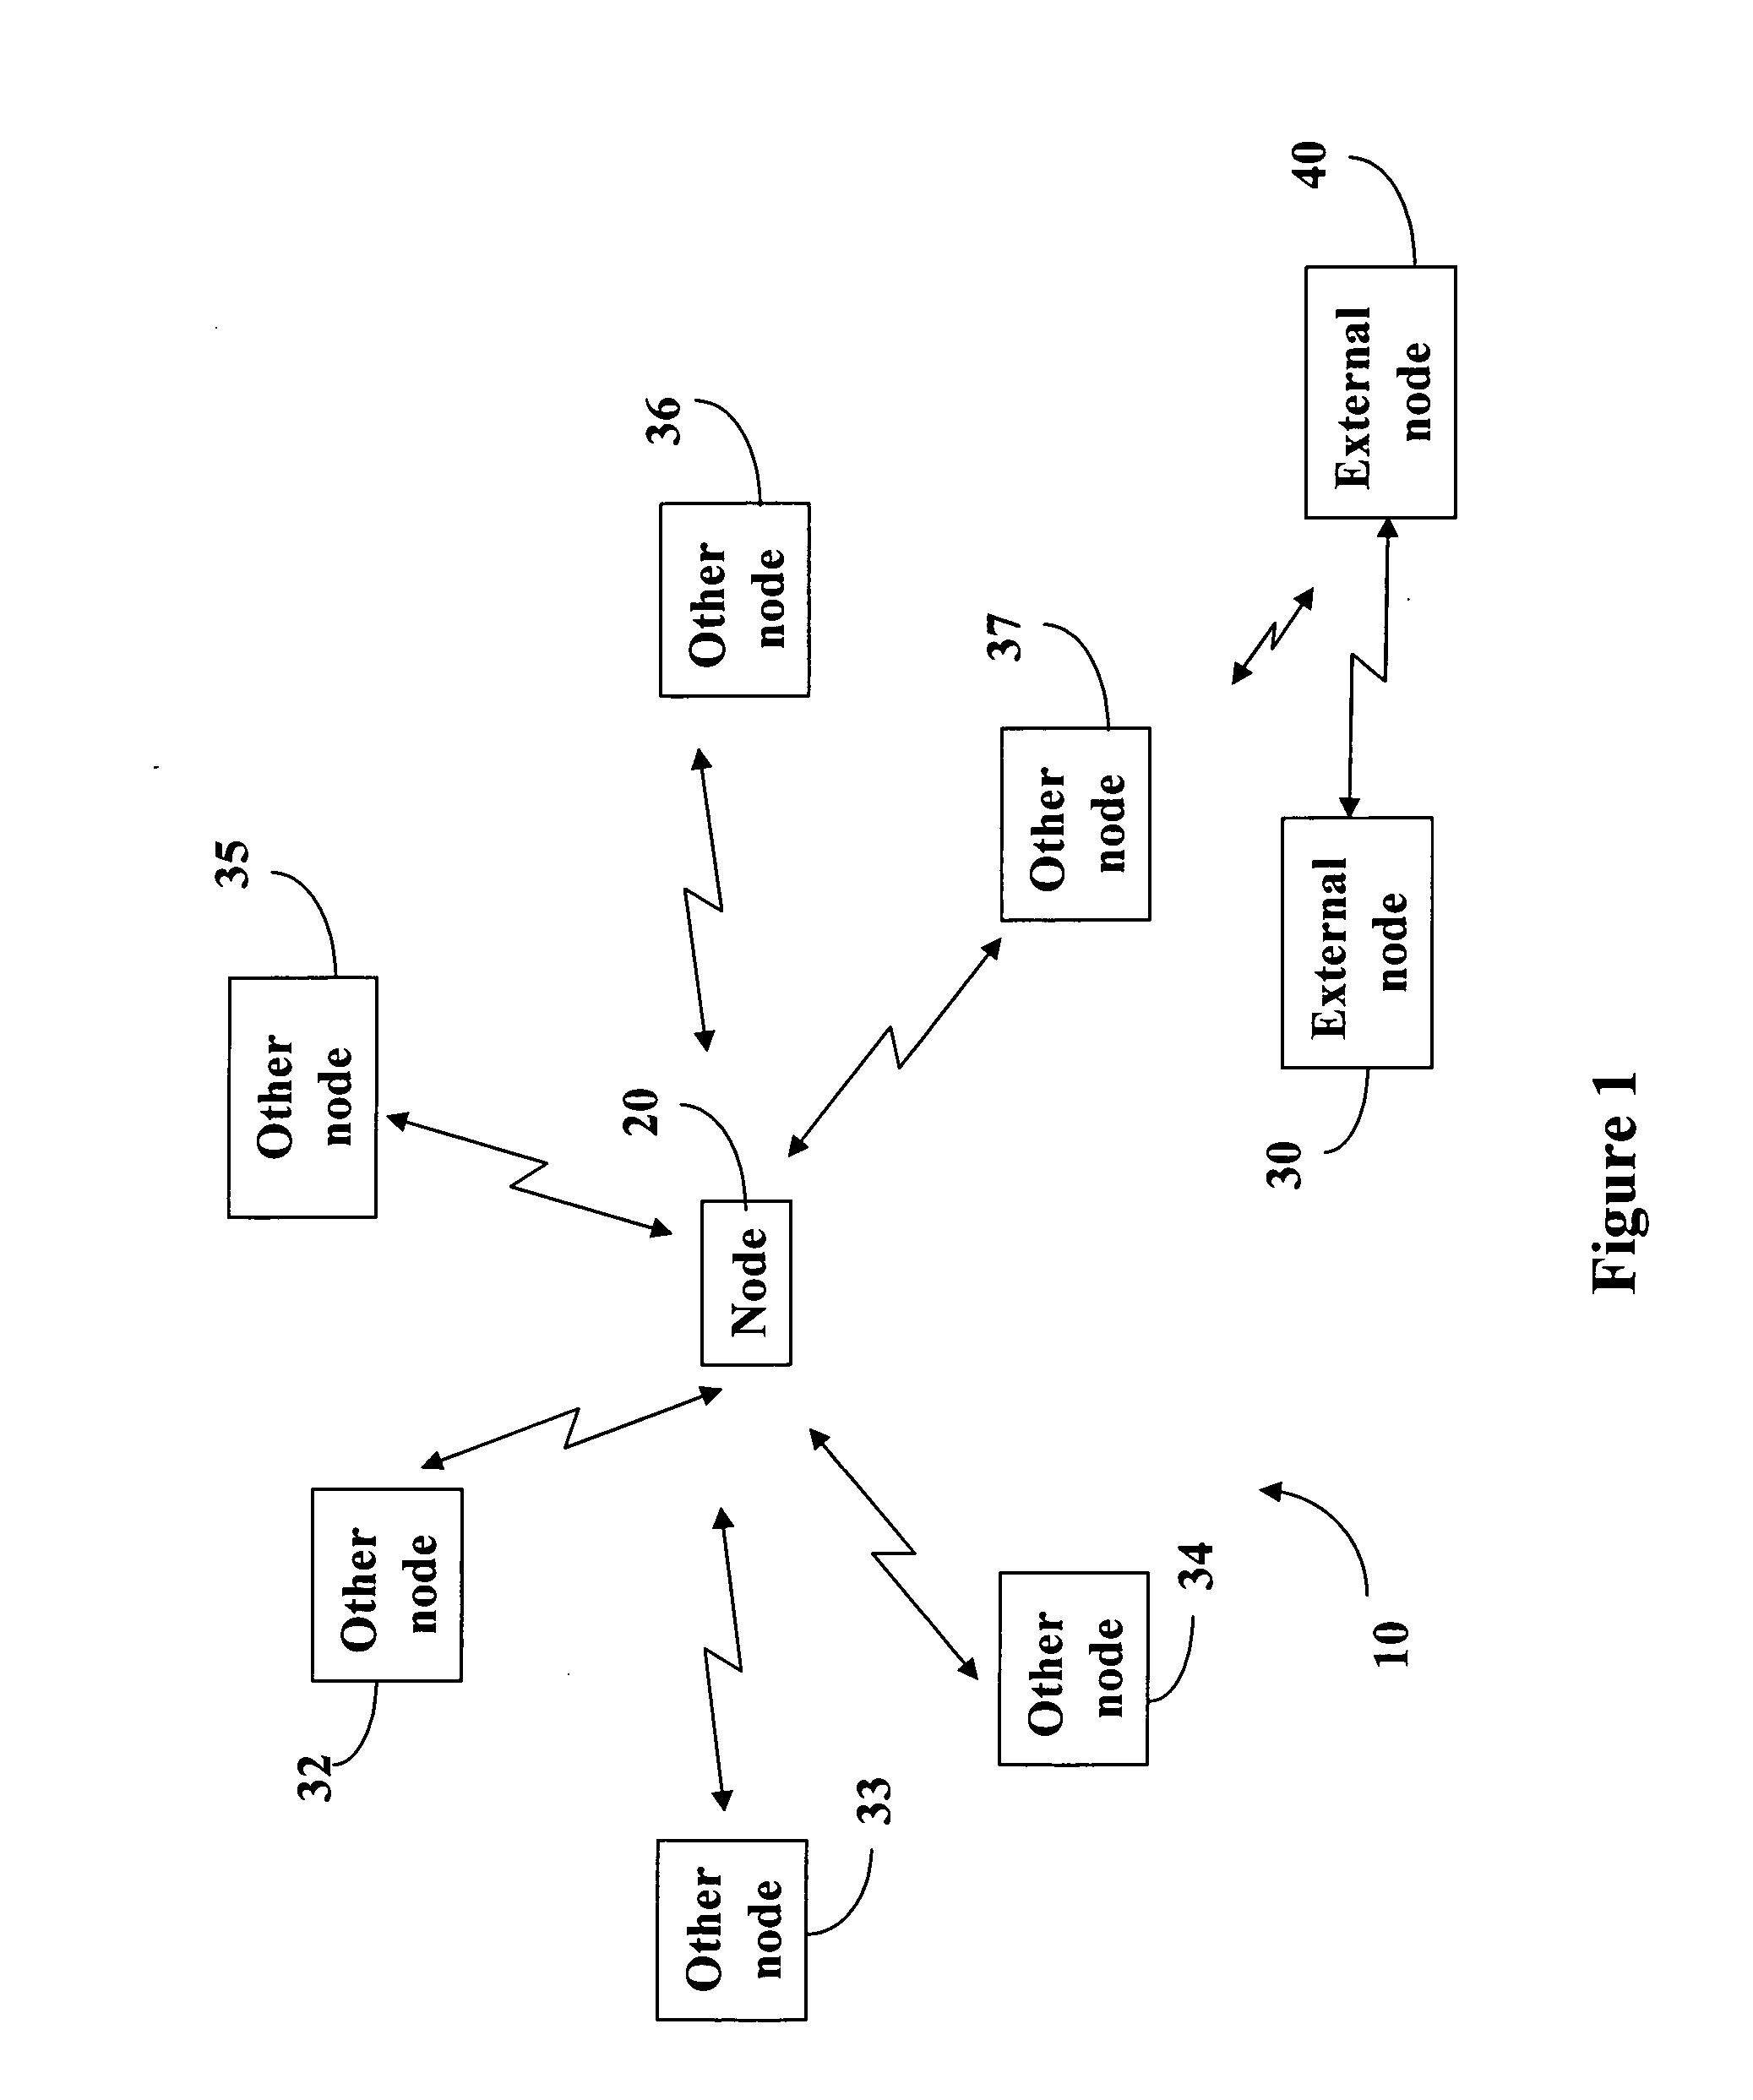 System and method to perform stable distributed power control in a wireless network